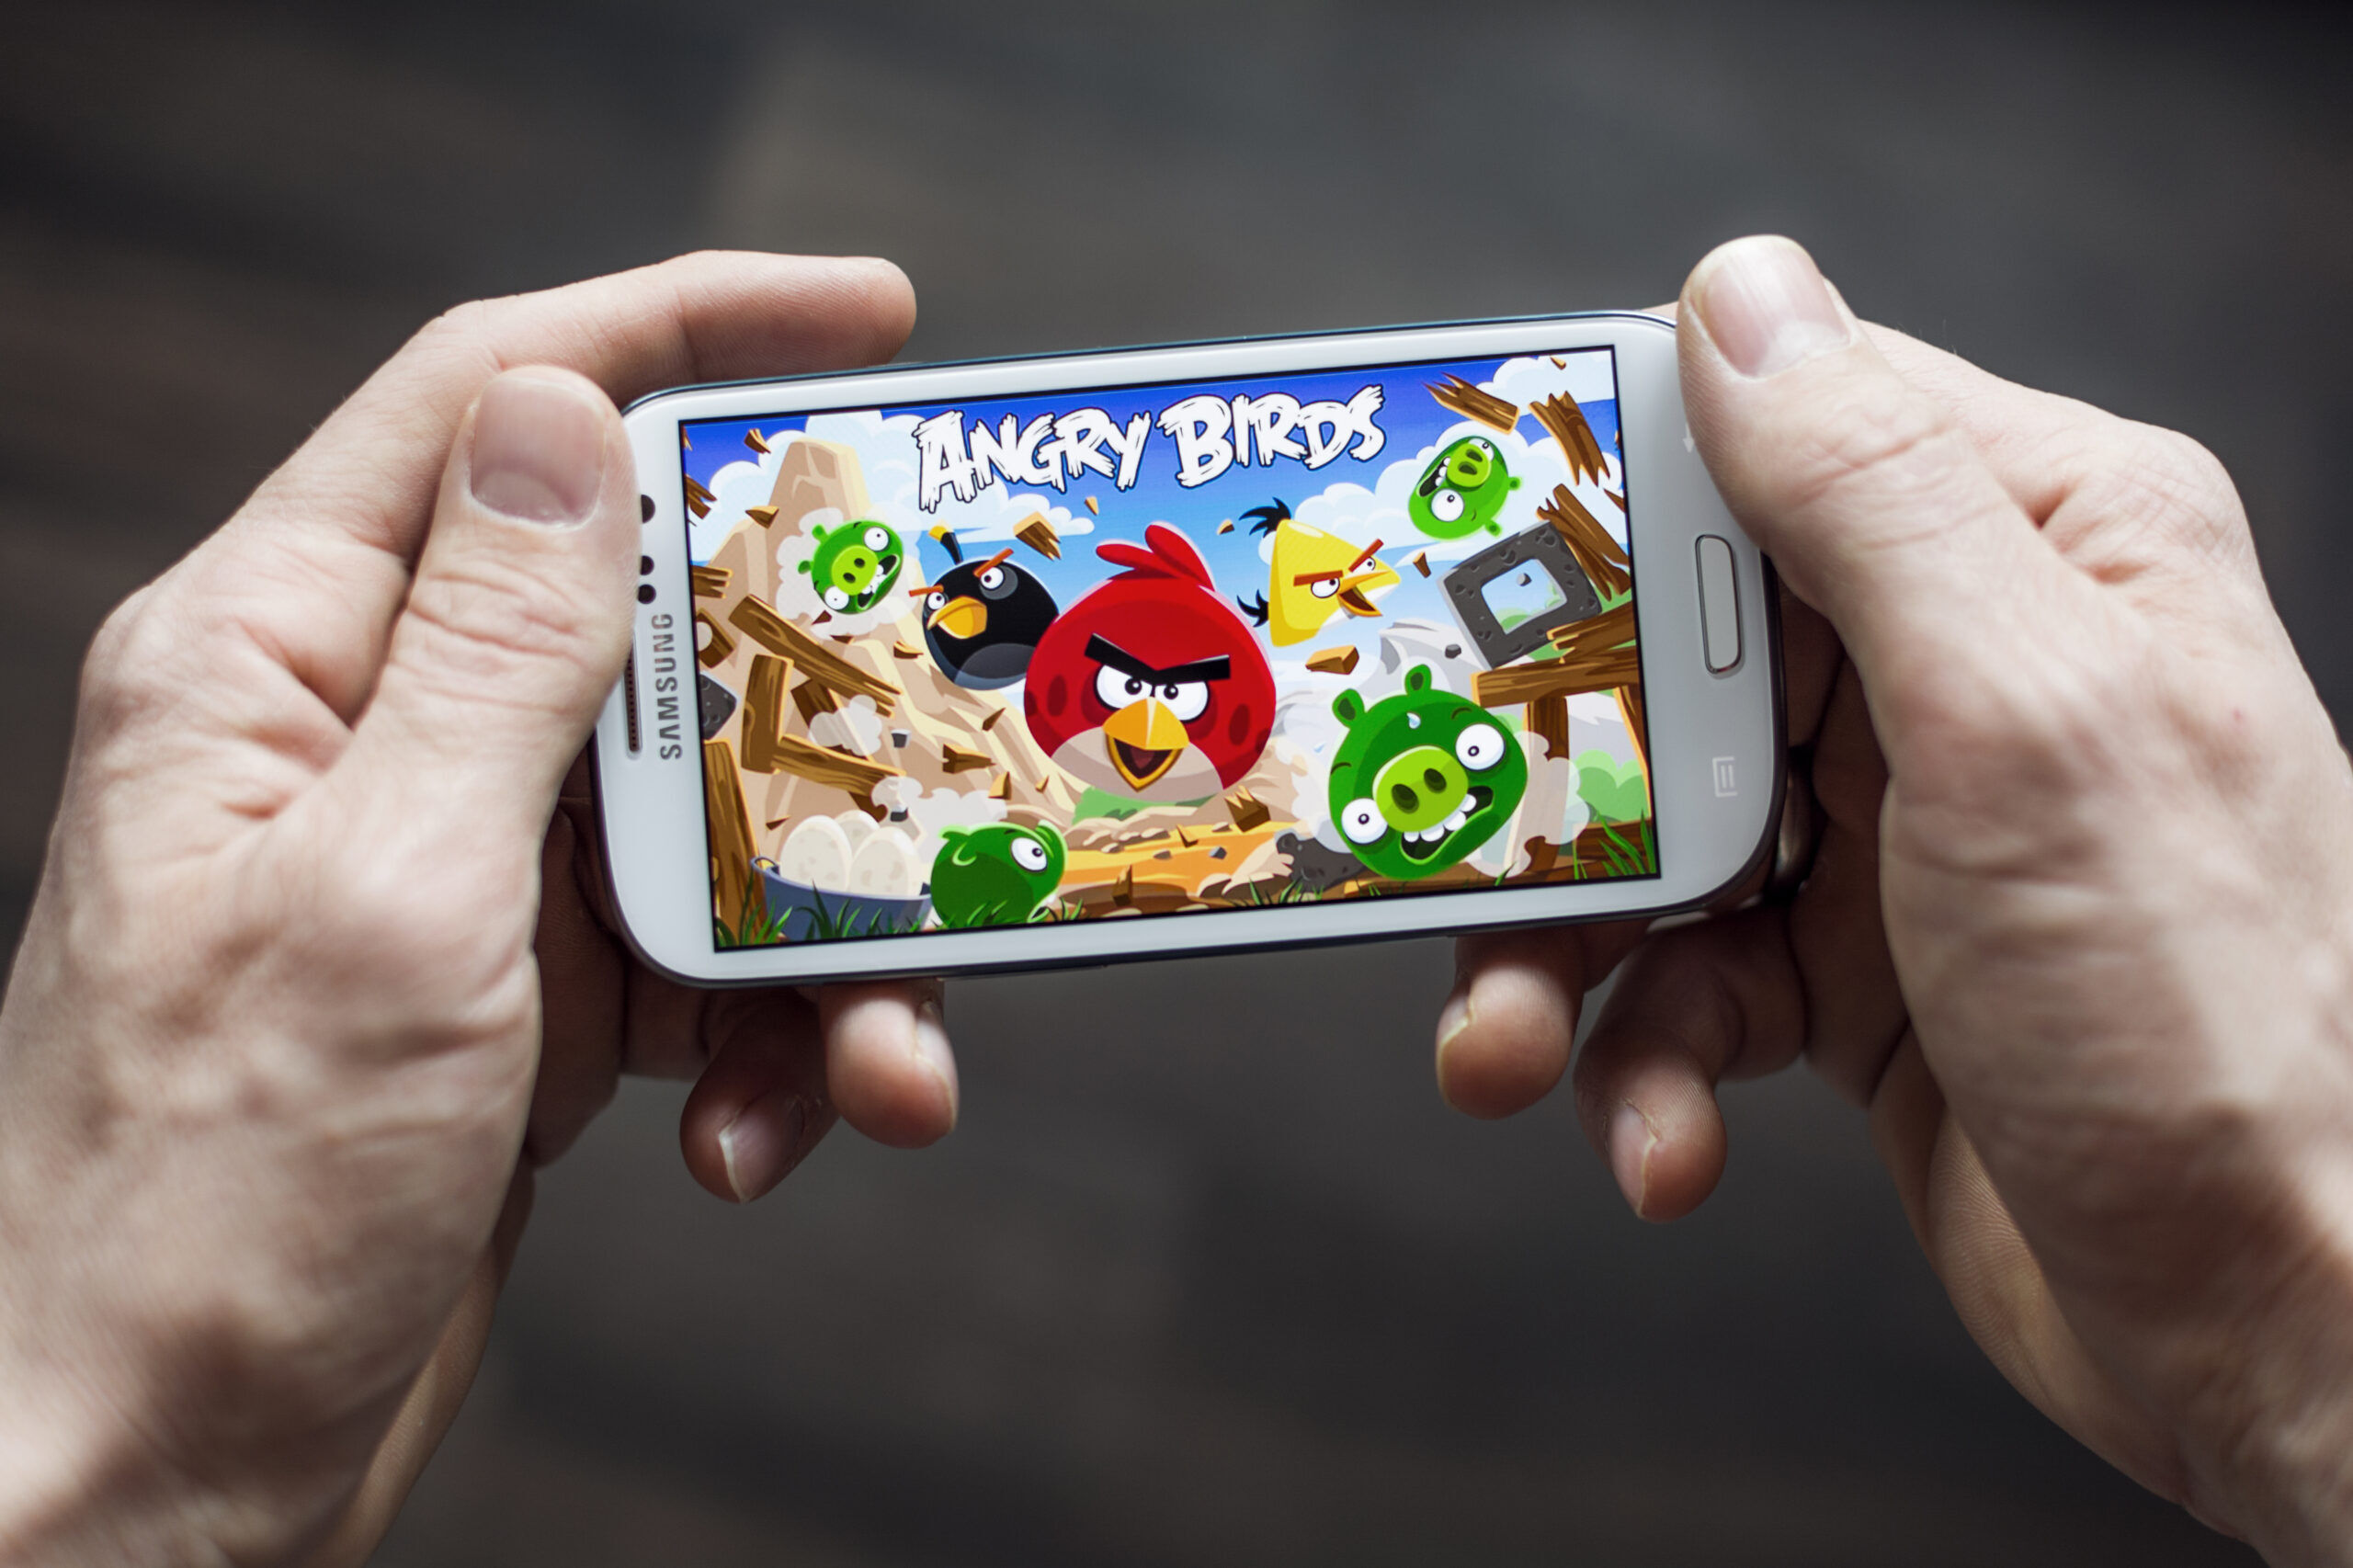 HILVERSUM, NETHERLANDS - FEBRUARY 23, 2014: Angry Birds is a video game by Finnish game developer Rovio Entertainment first released for iOS in 2009. It sold over 2 billion copies across all platforms